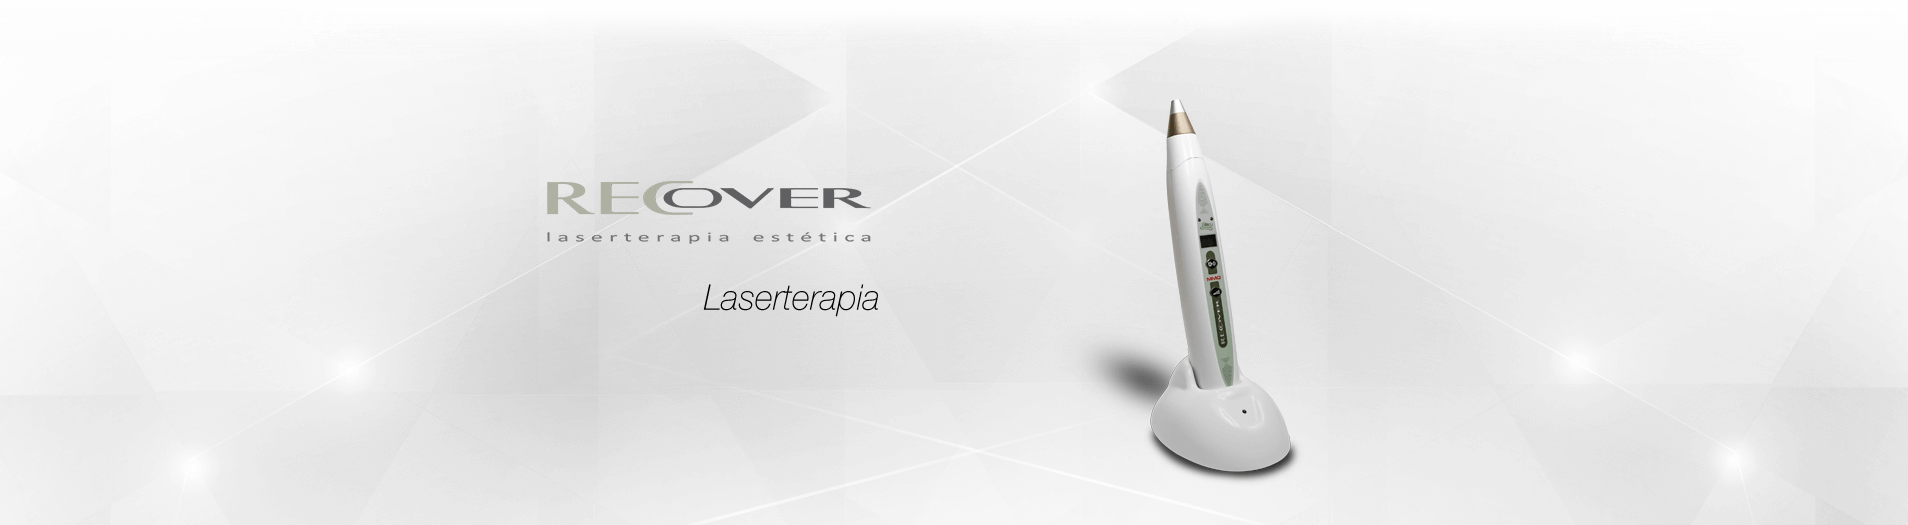 LASER RECOVER MMO